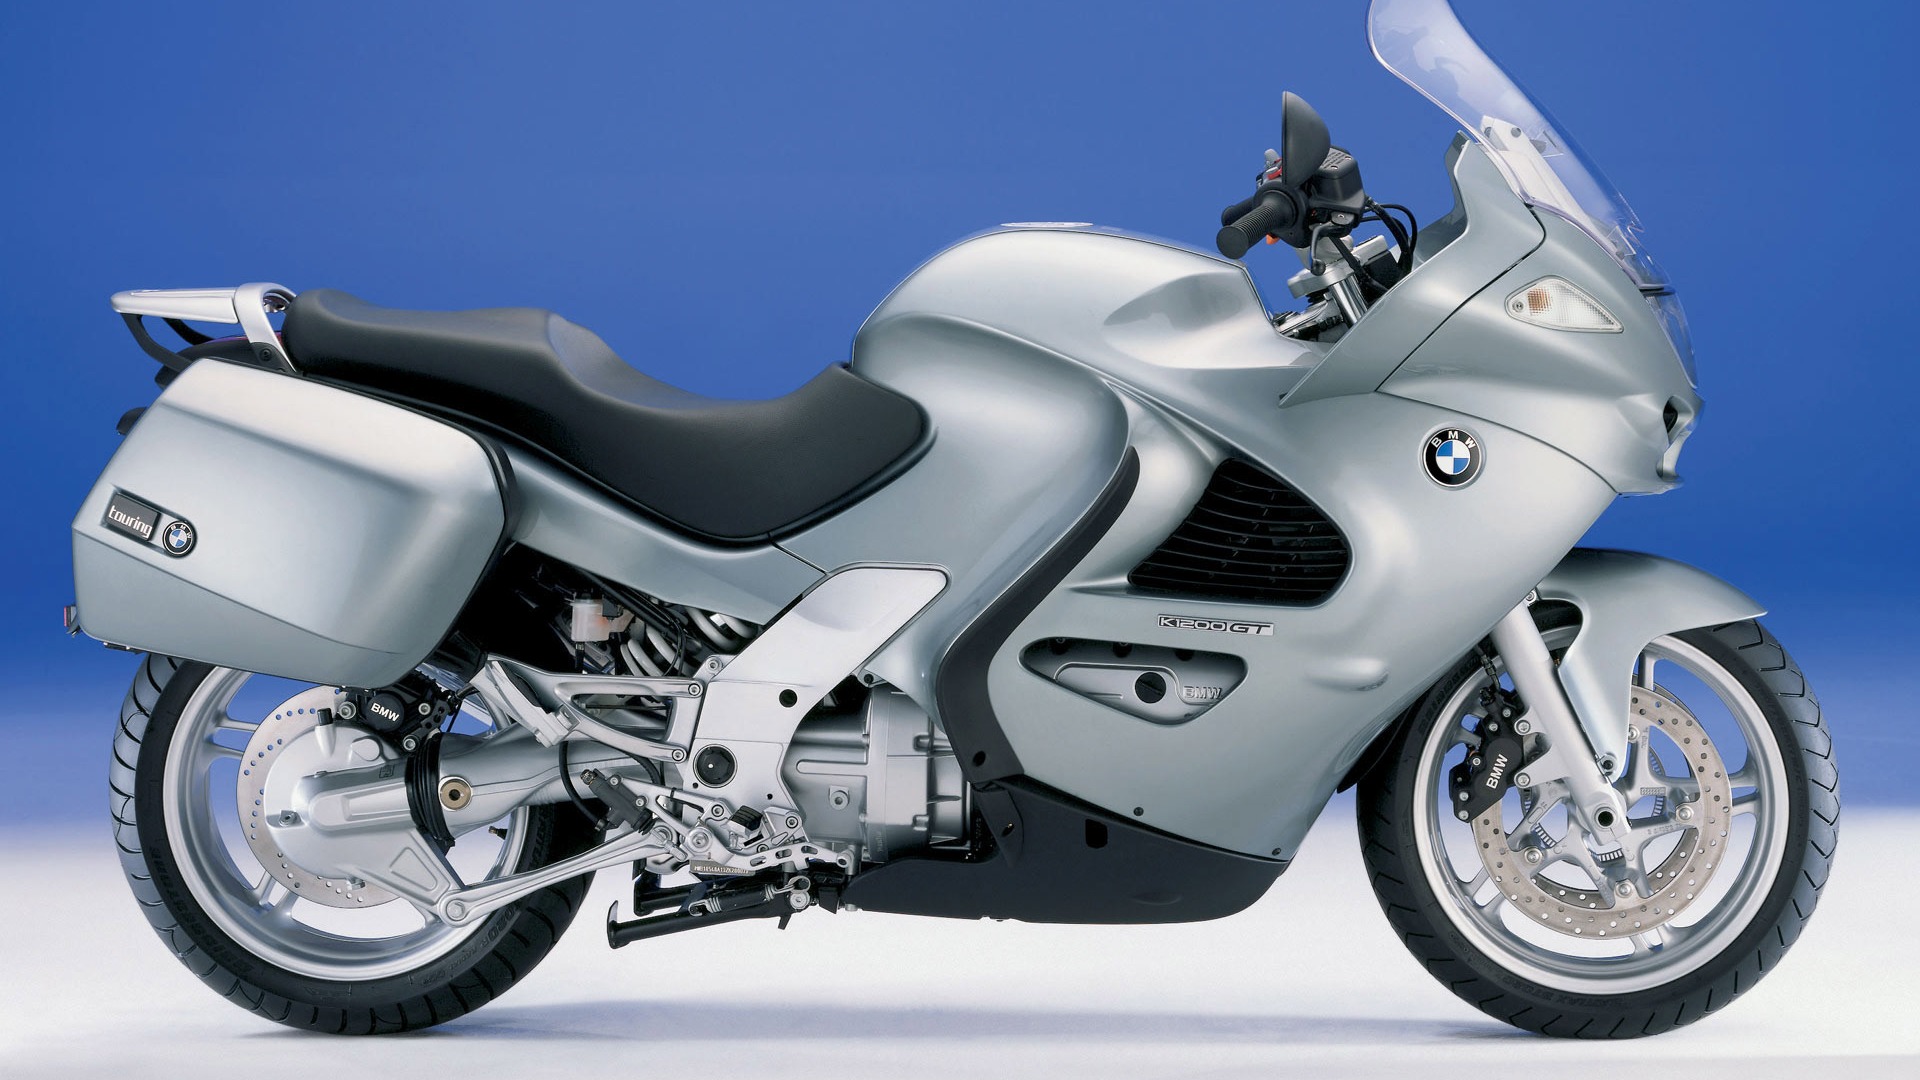 BMW motorcycle wallpapers (1) #19 - 1920x1080